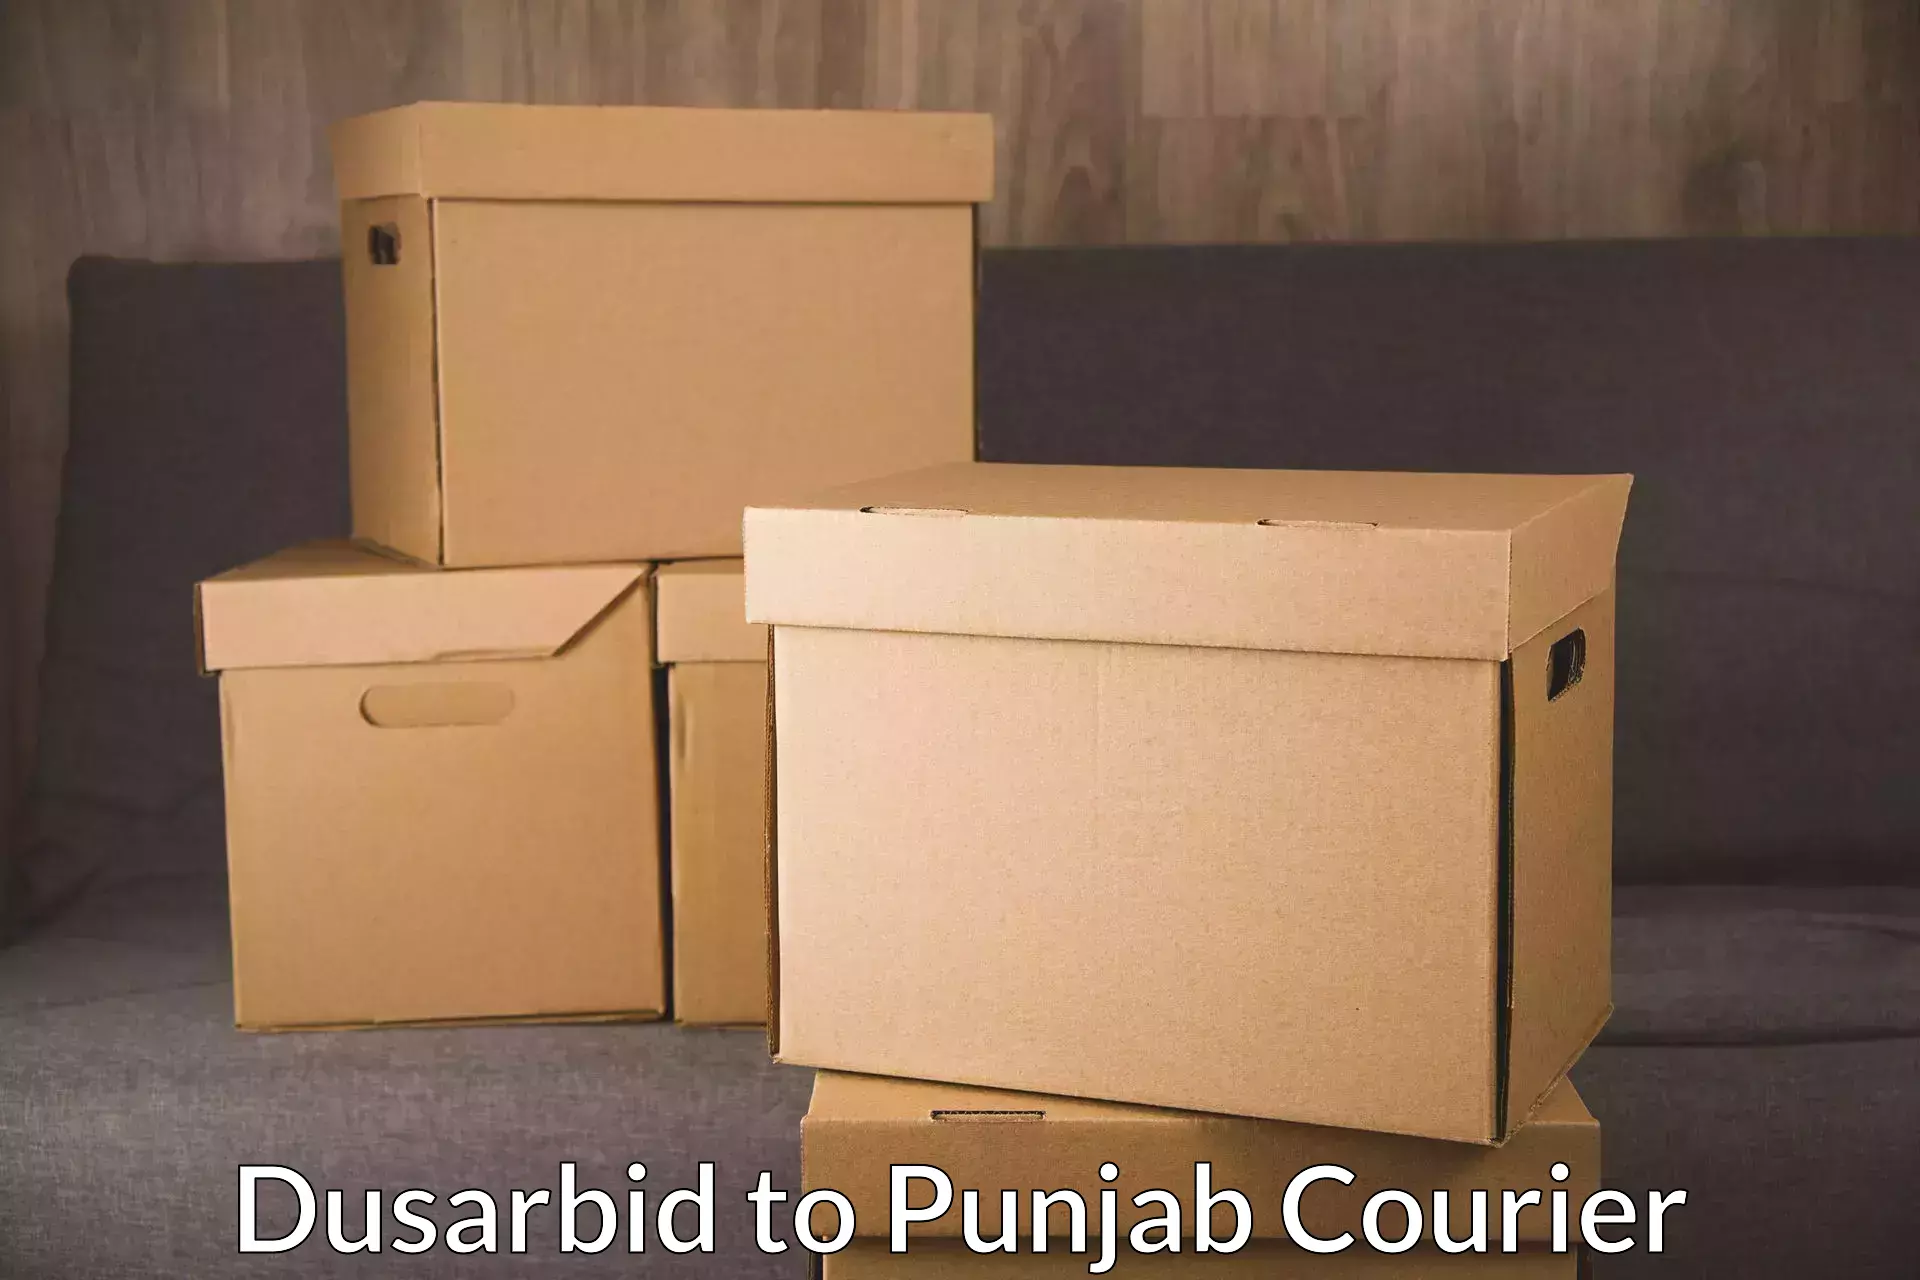 Specialized courier services in Dusarbid to Faridkot